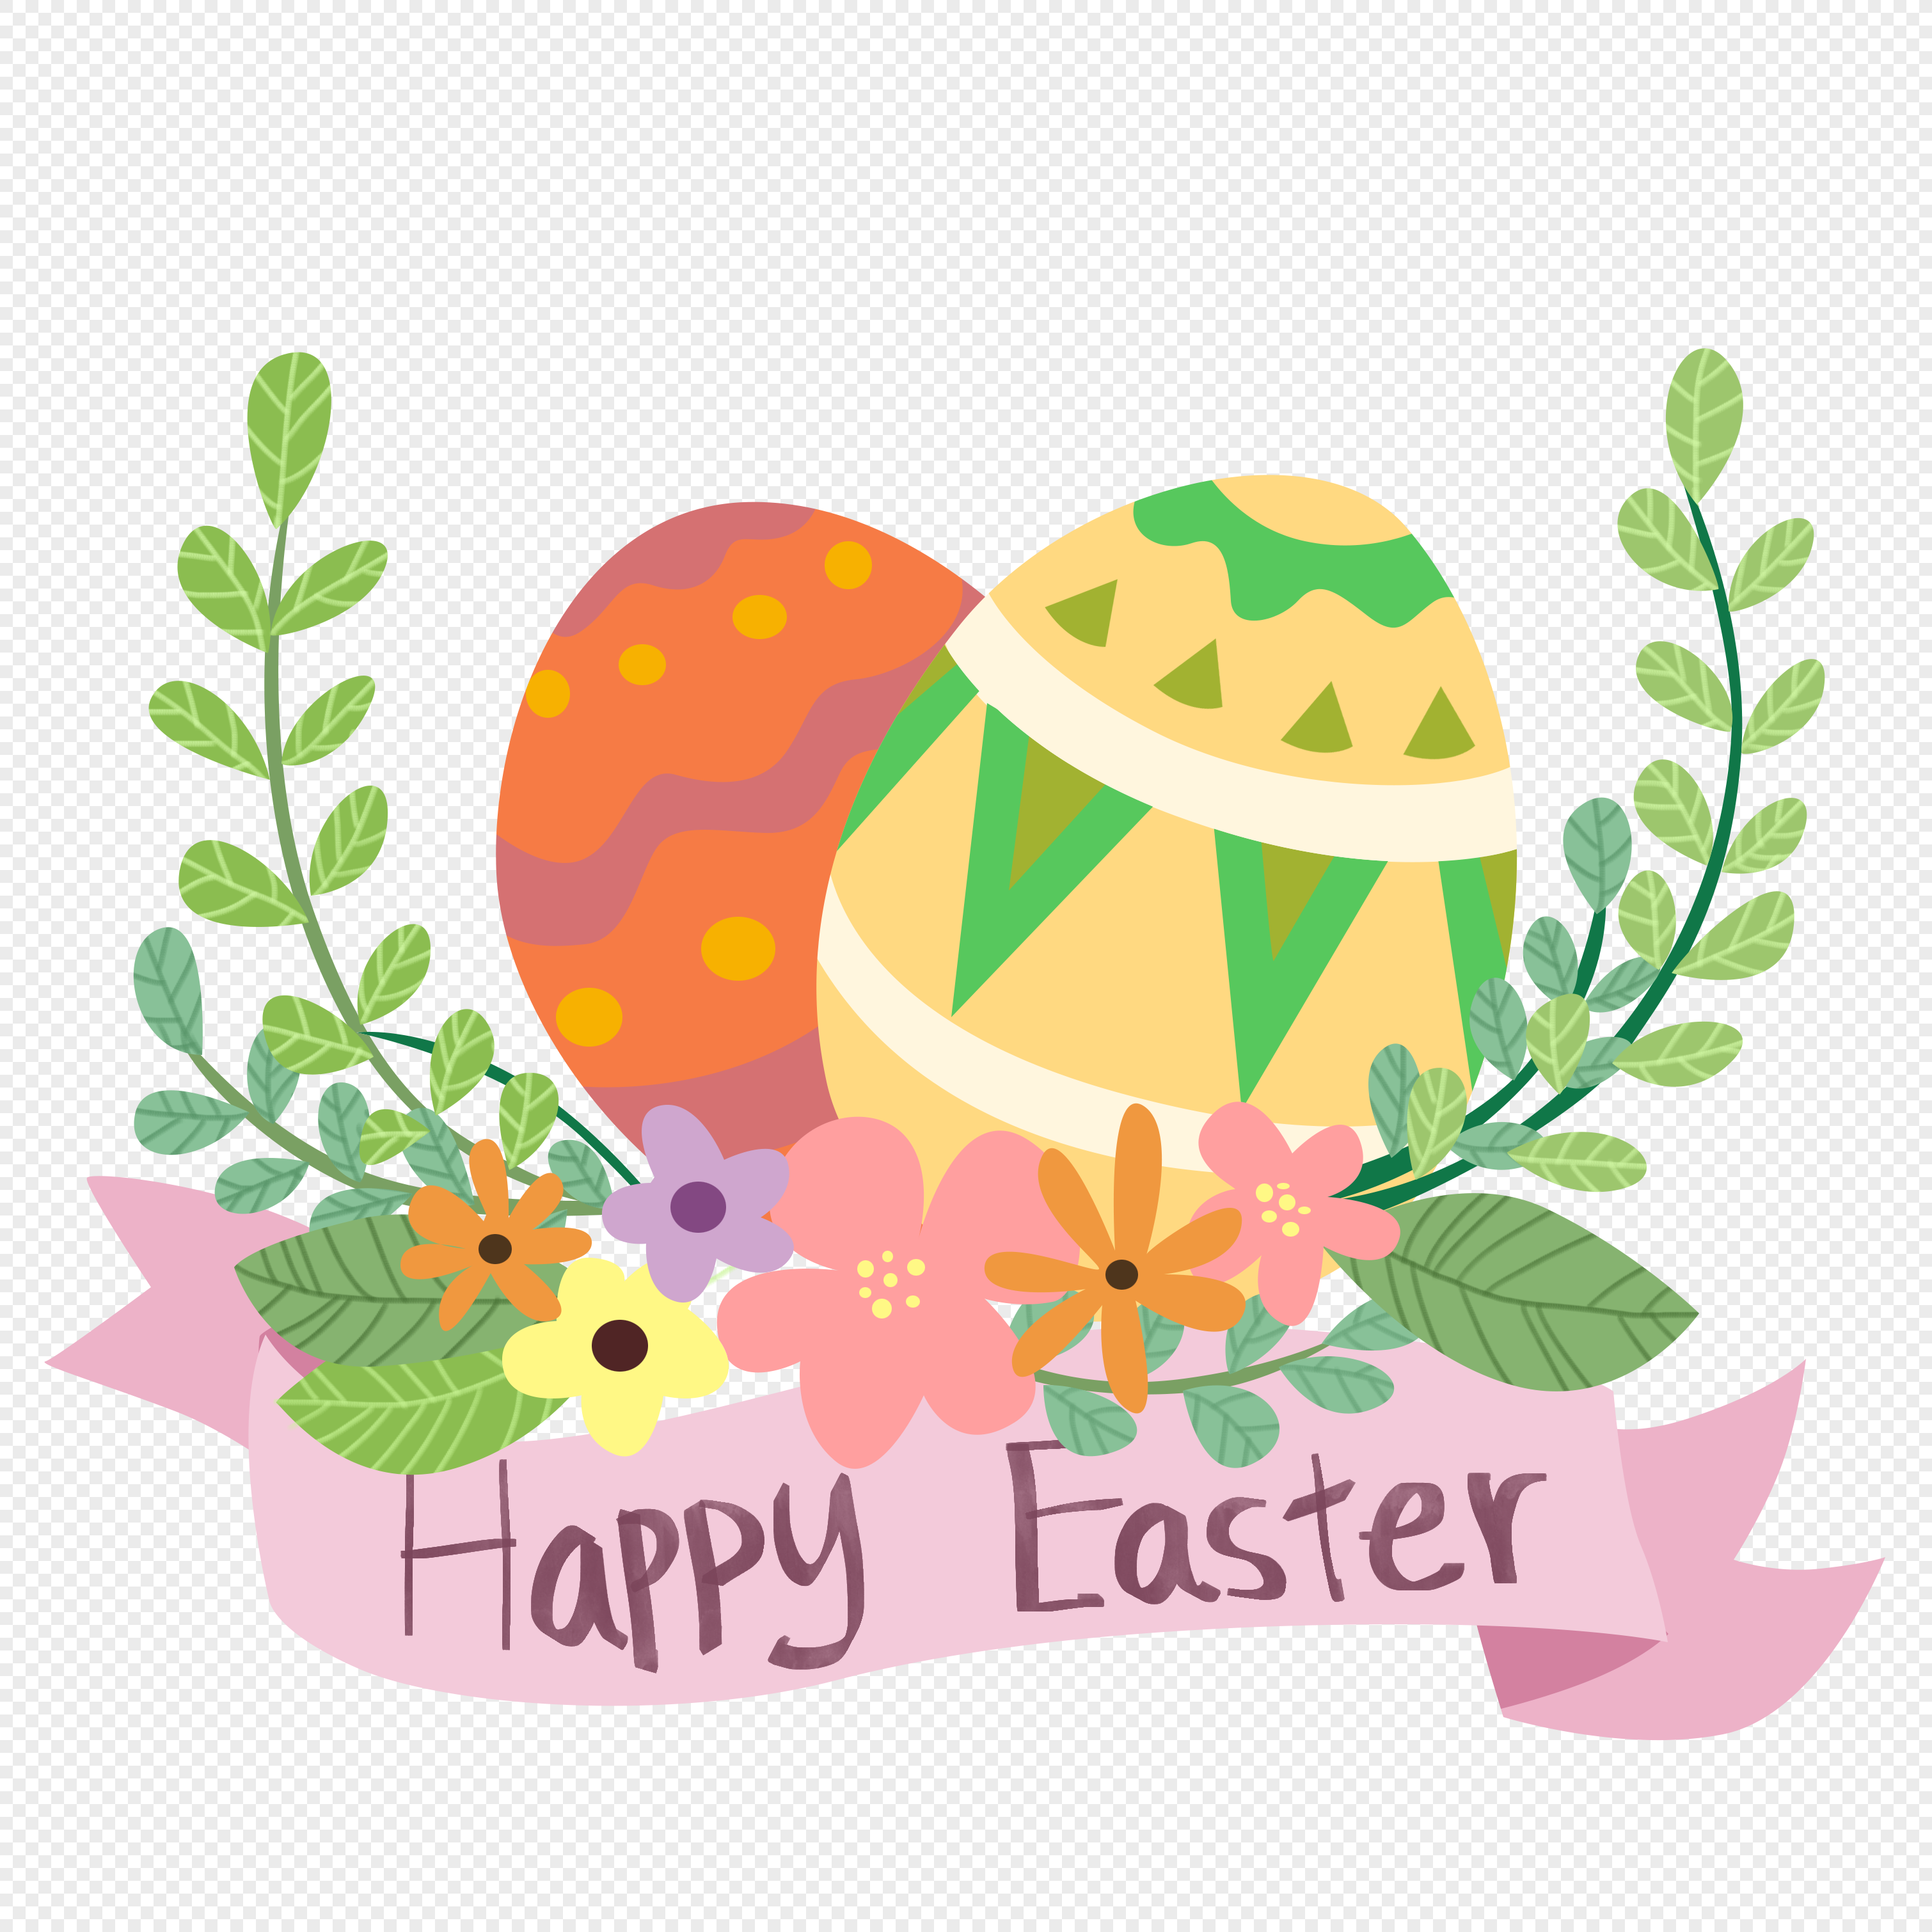 Easter Holiday PNG Transparent, Western Holiday Easter Eggs, Easter  Clipart, Easter, Eggs PNG Image For Free Download